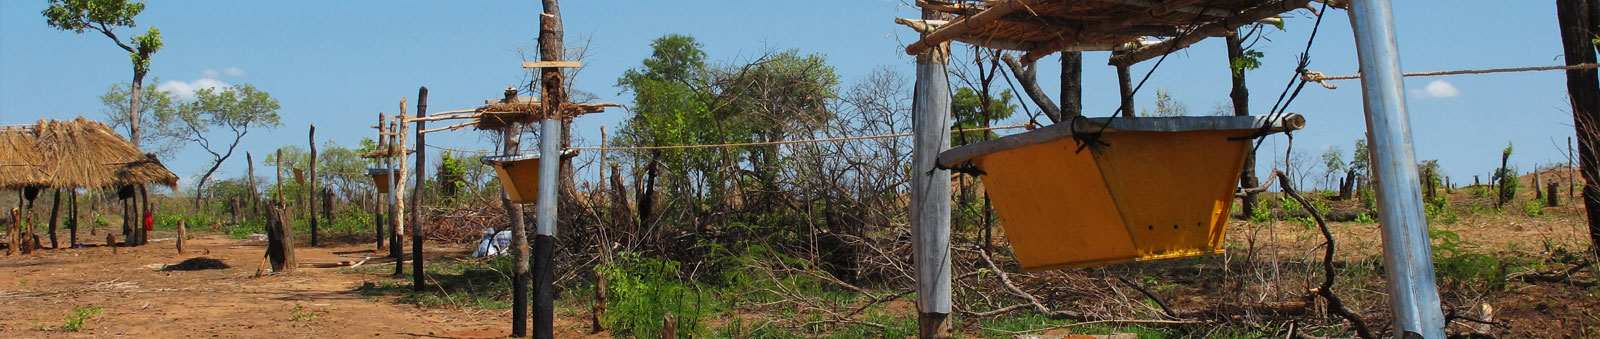 Mozambican beehive fence in Niassa